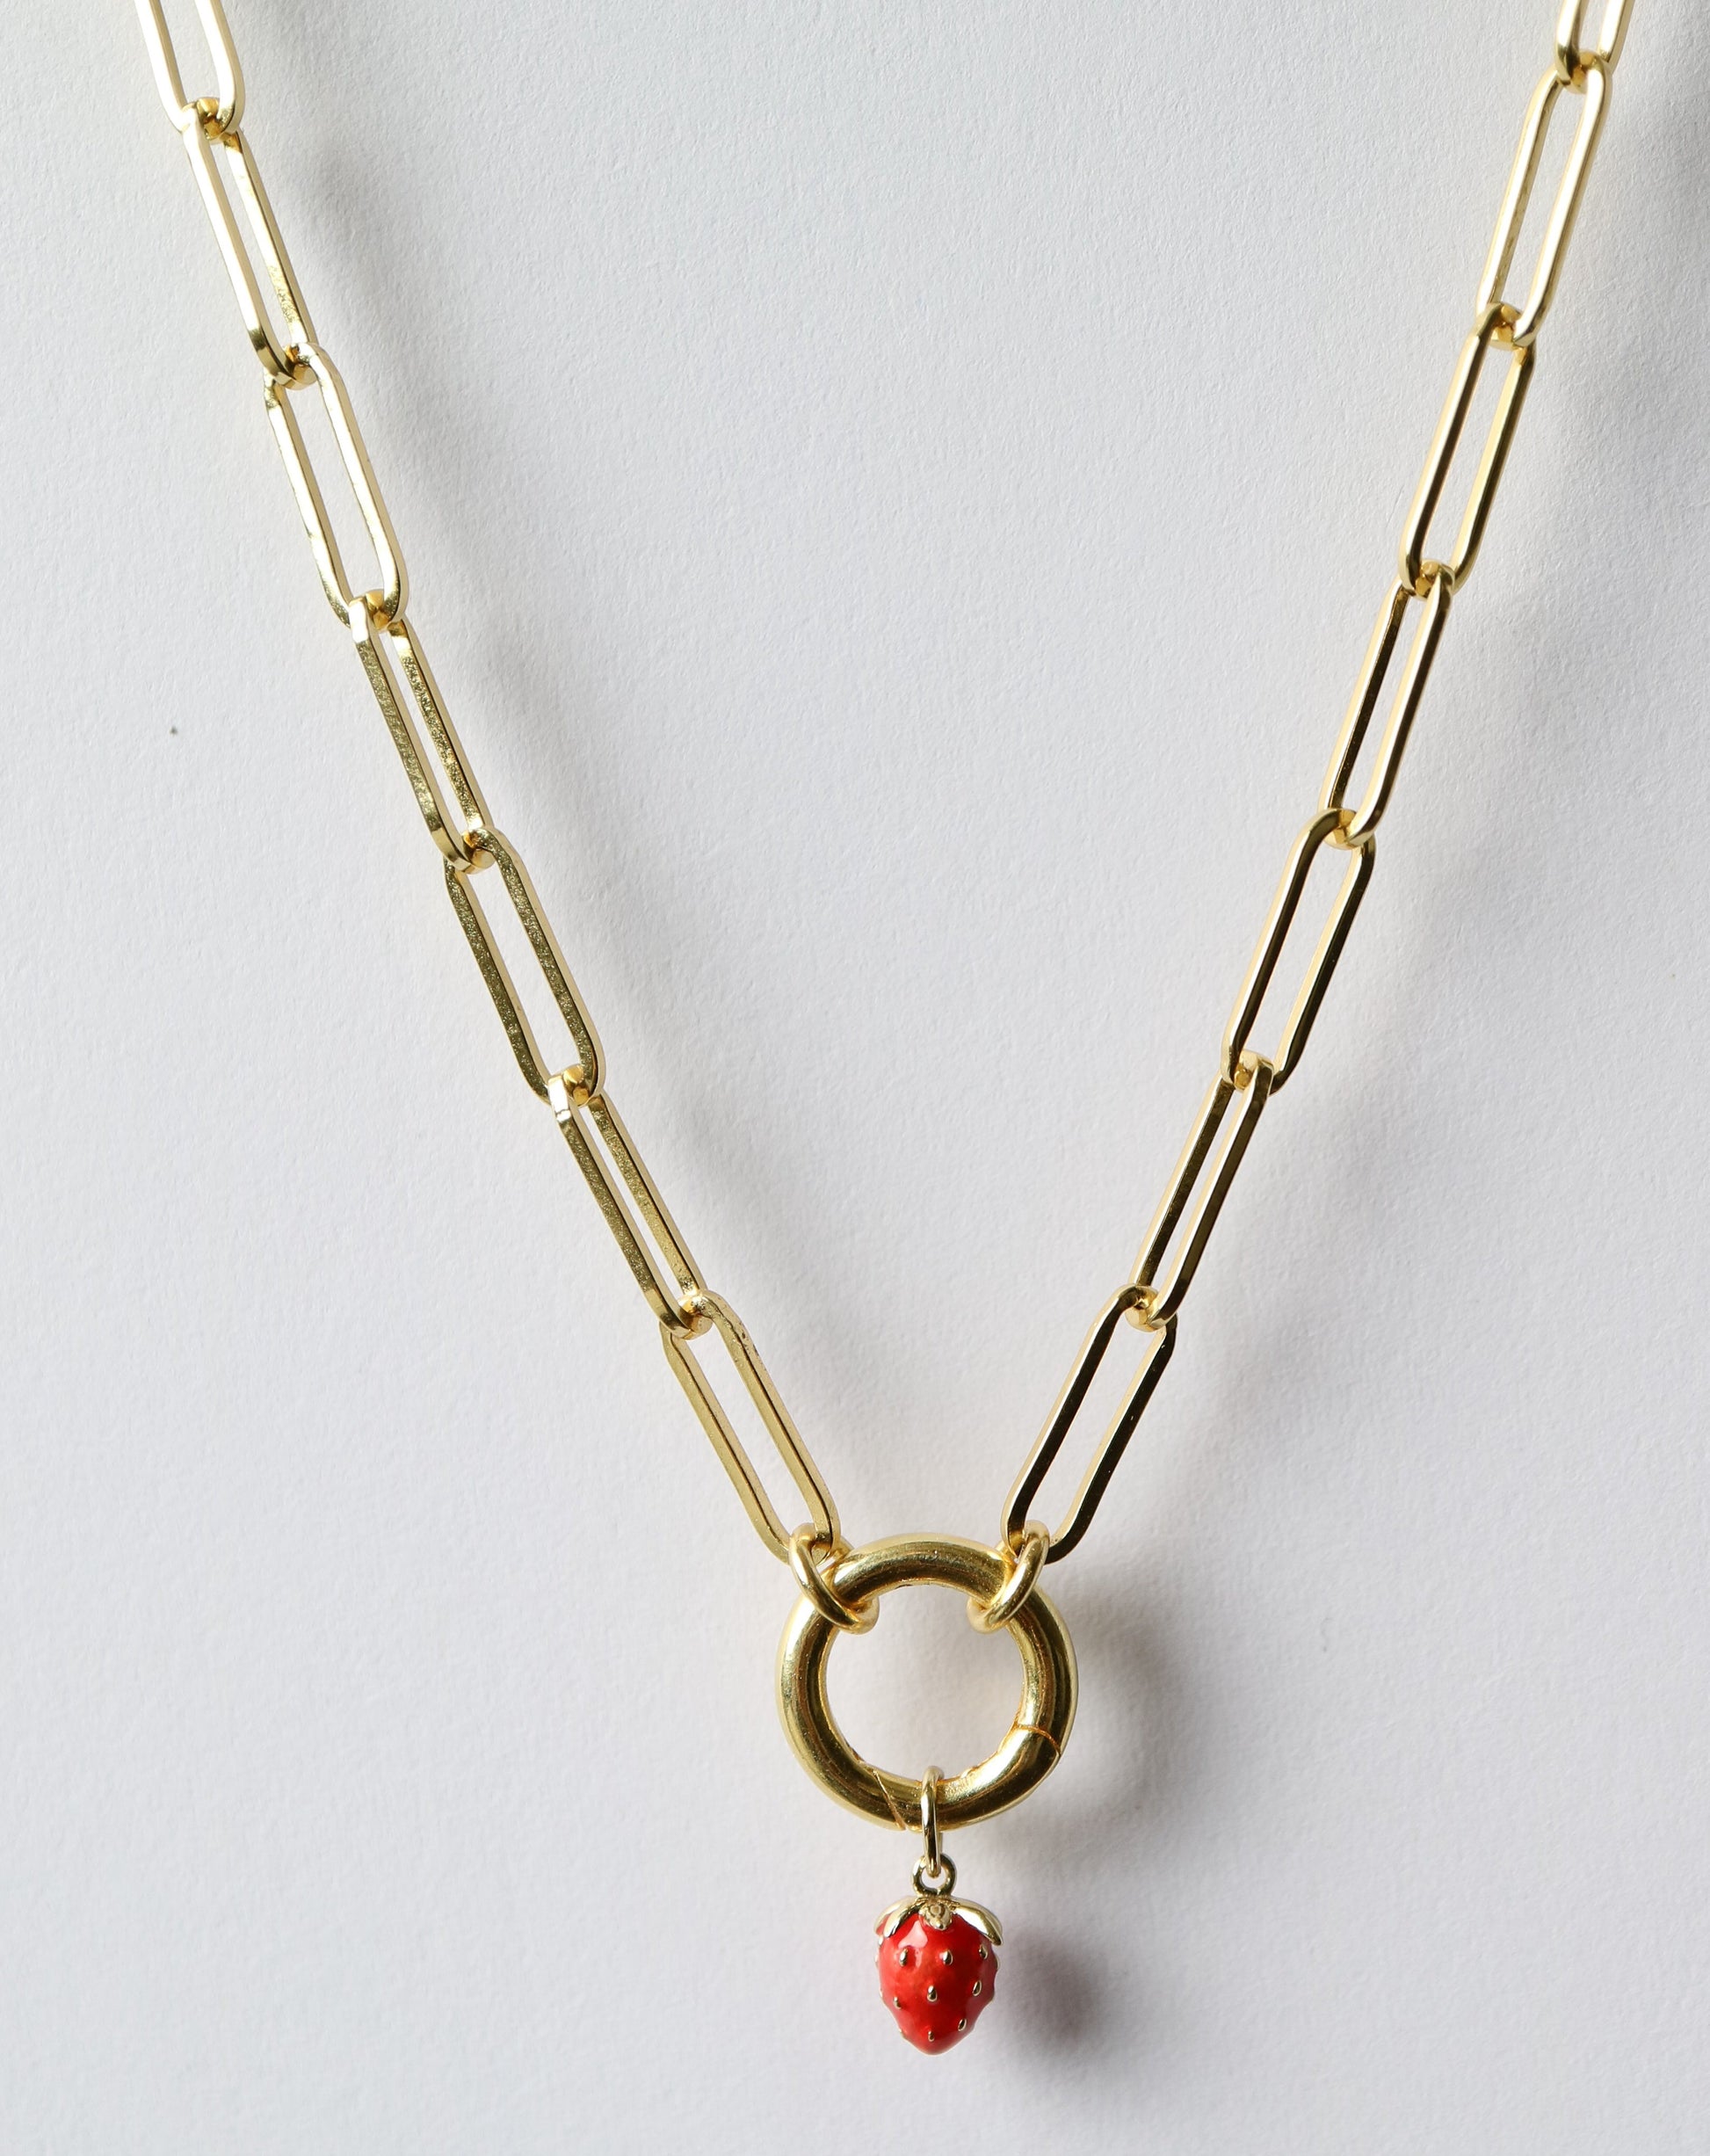 Gold Paperclip Necklace with strawberry charm